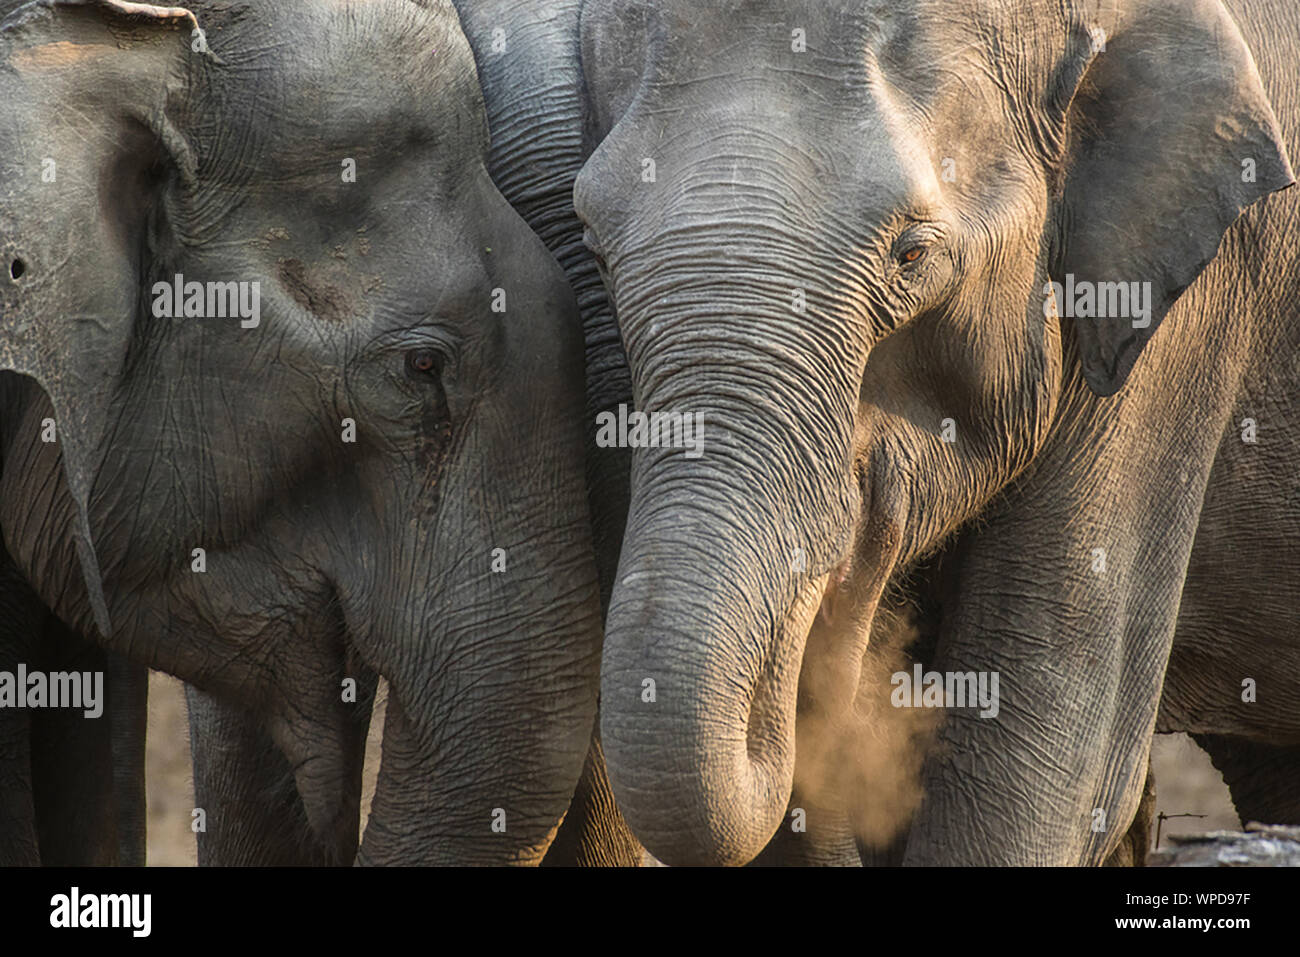 An elephant family in the wild Stock Photo